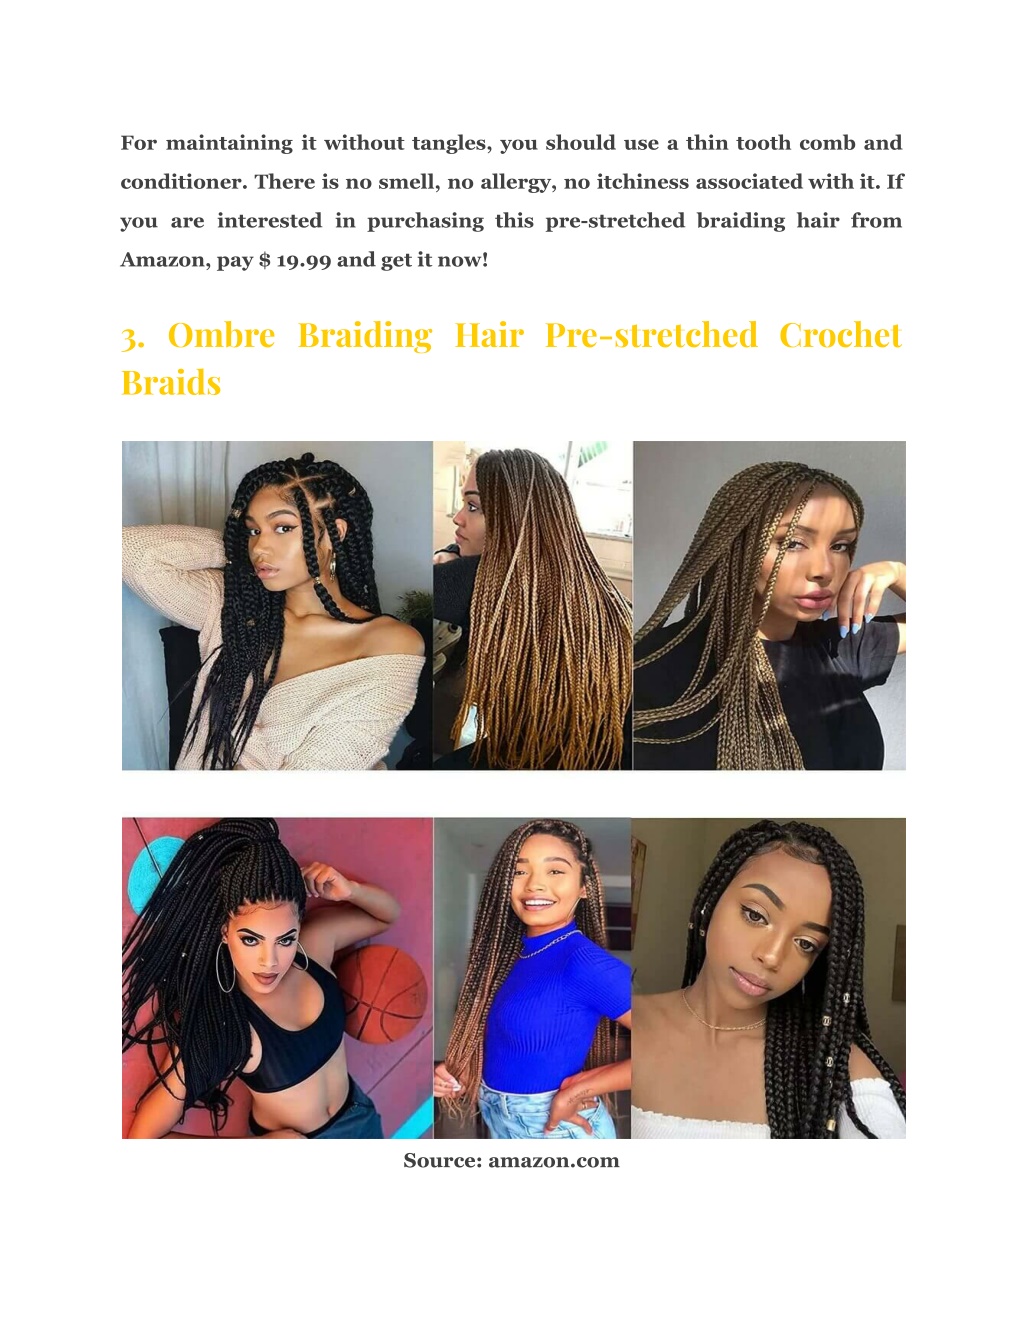 Ppt 14 Pre Stretched Braiding Hair That Suits Everyone Powerpoint Presentation Id11111161